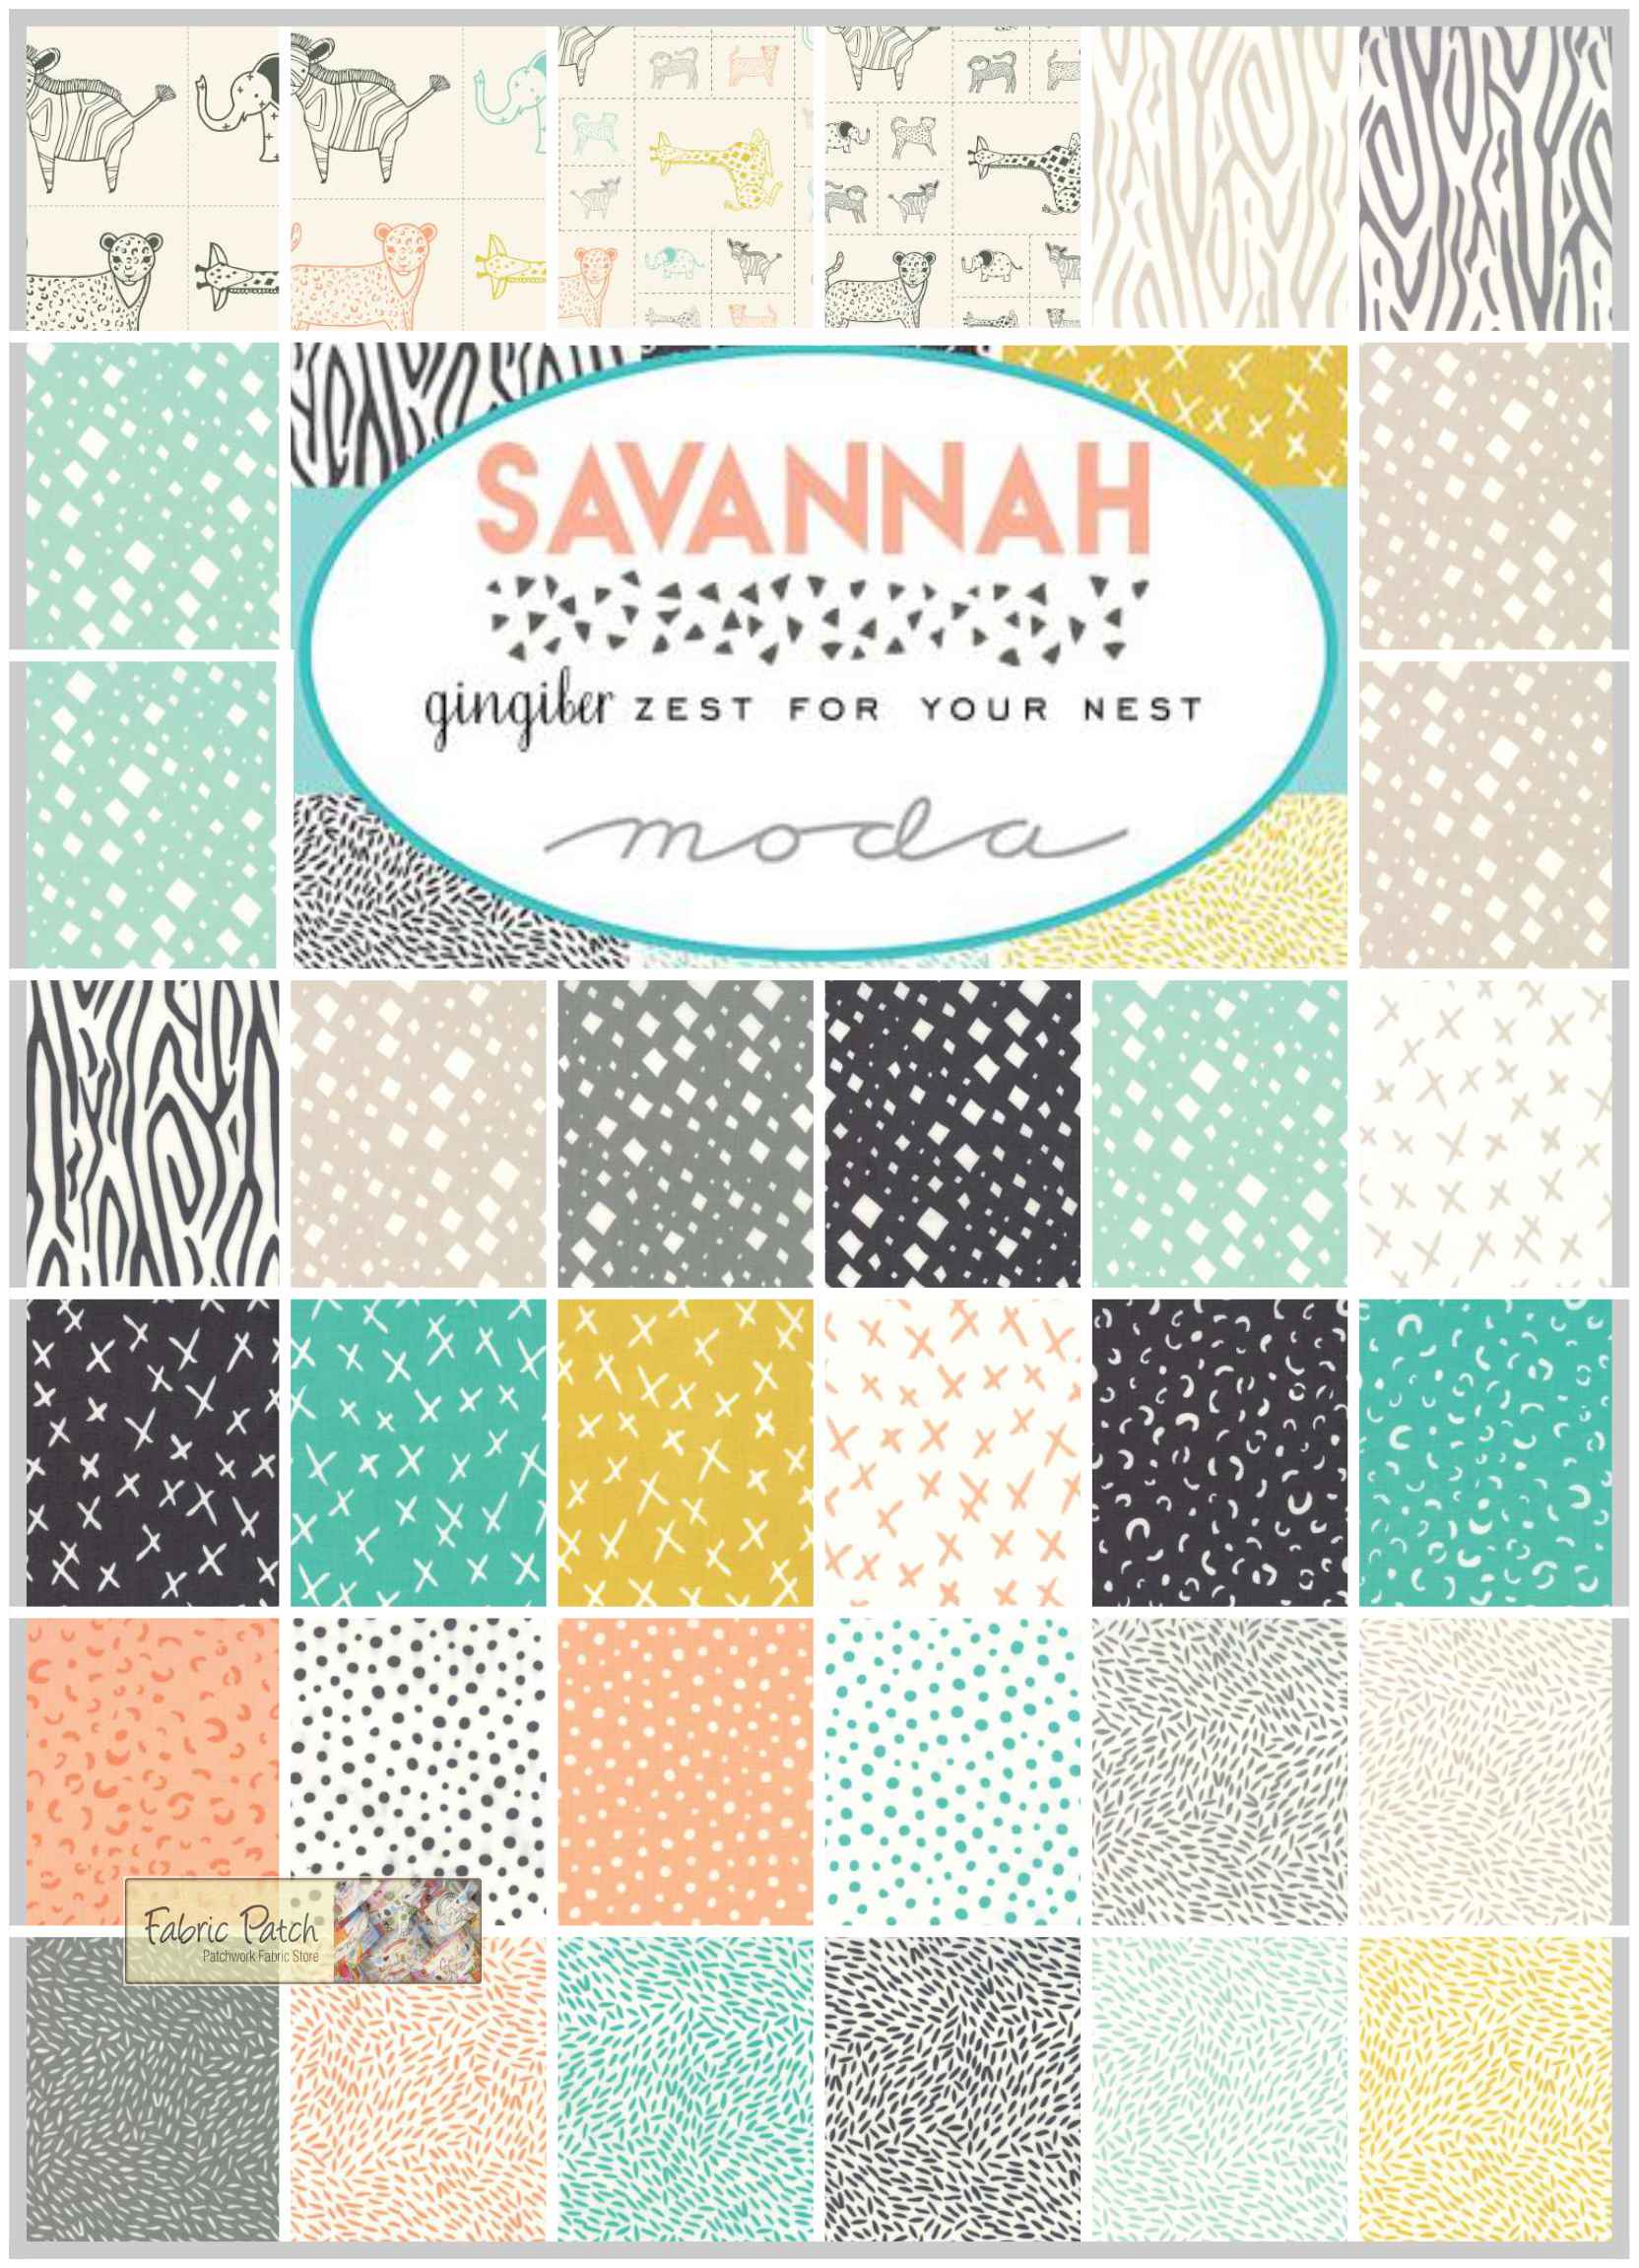 Savannah fat quarter bundle by Gingiber for Moda Fabrics - patchwork and quilting fabric